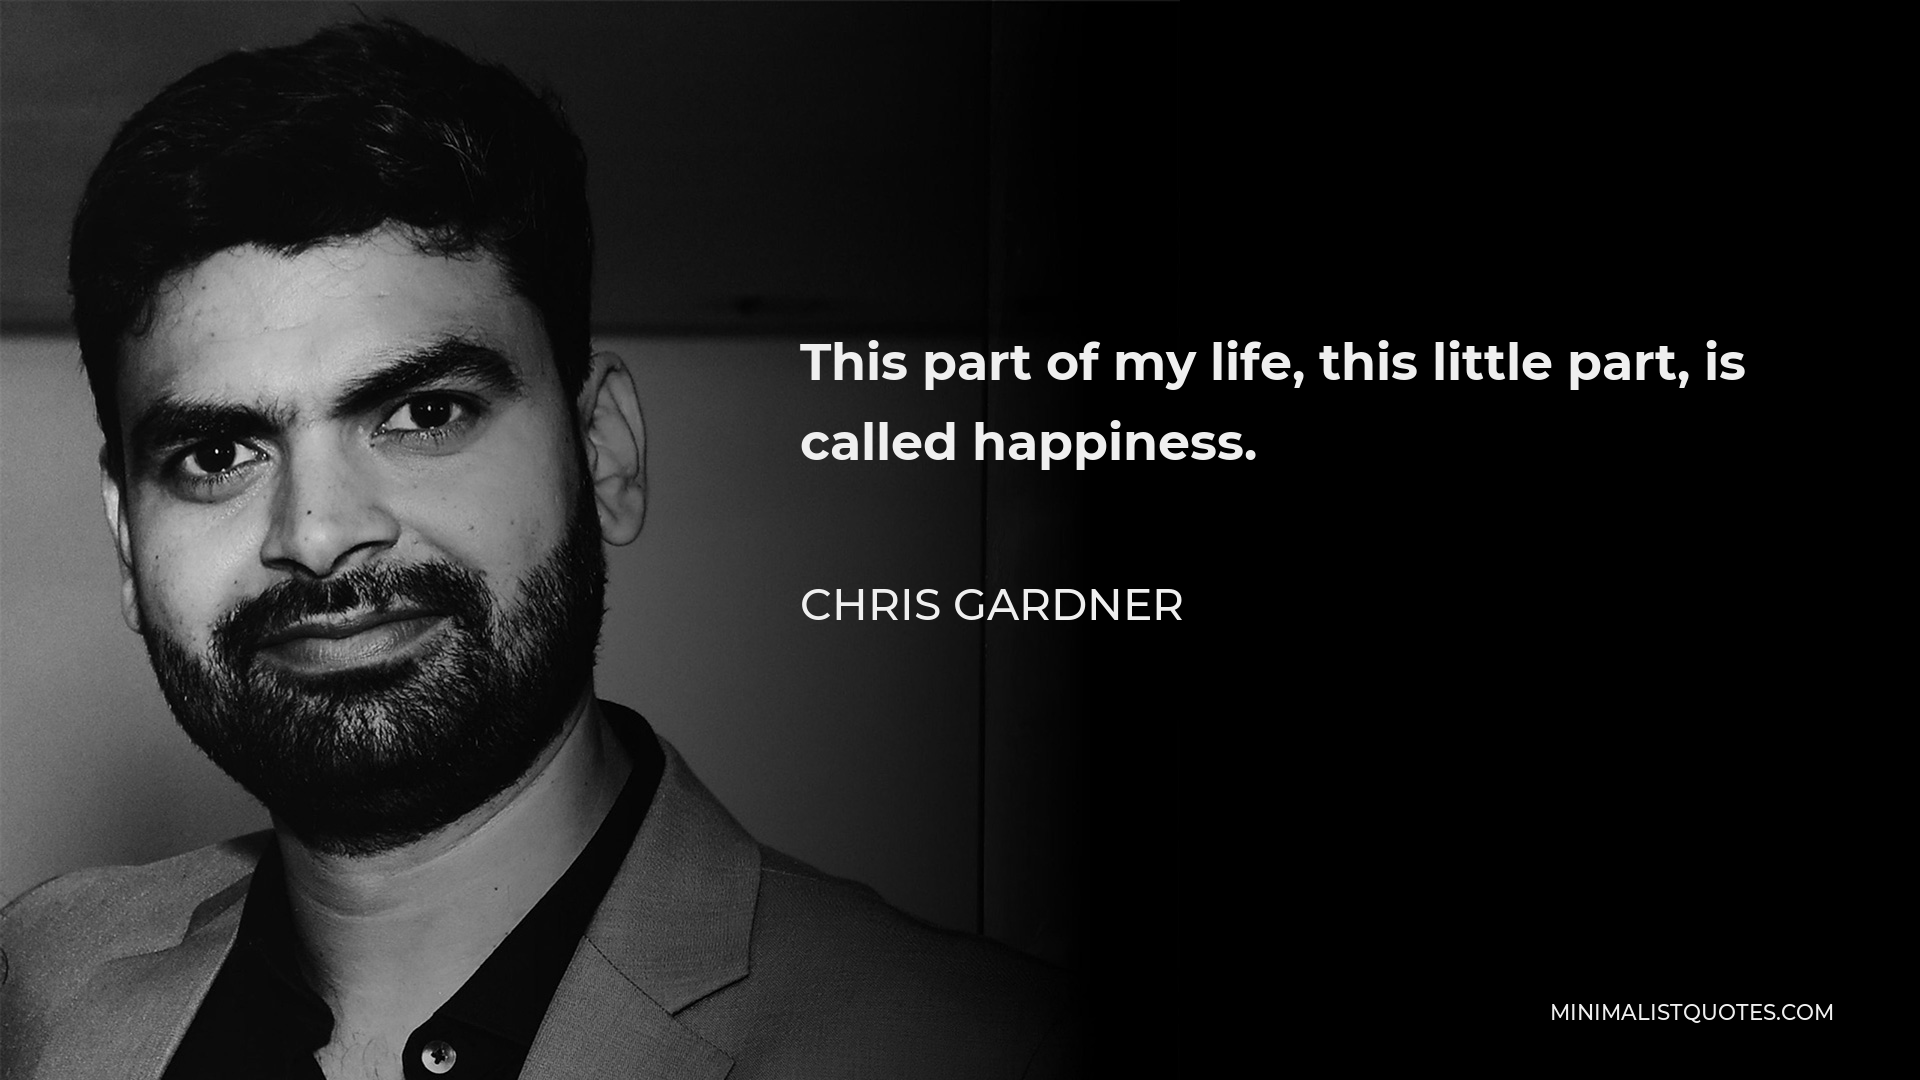 Chris Gardner Quote - This part of my life, this little part, is called happiness.